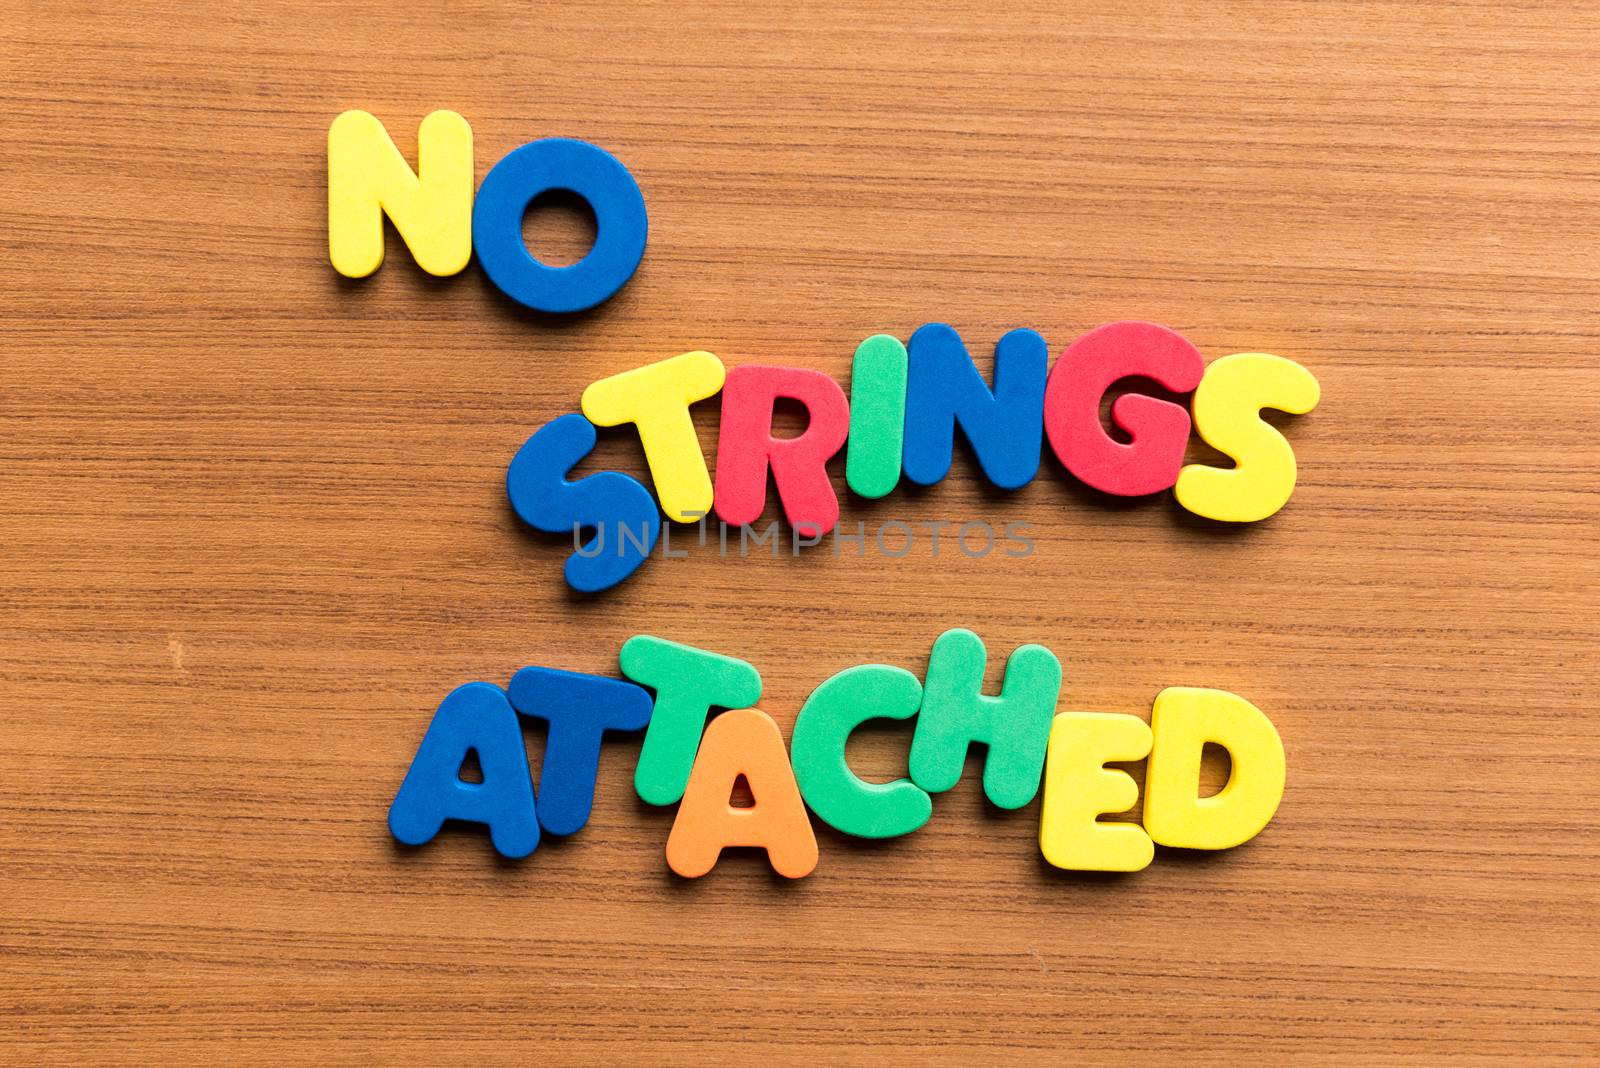 no strings attached colorful word on the wooden background